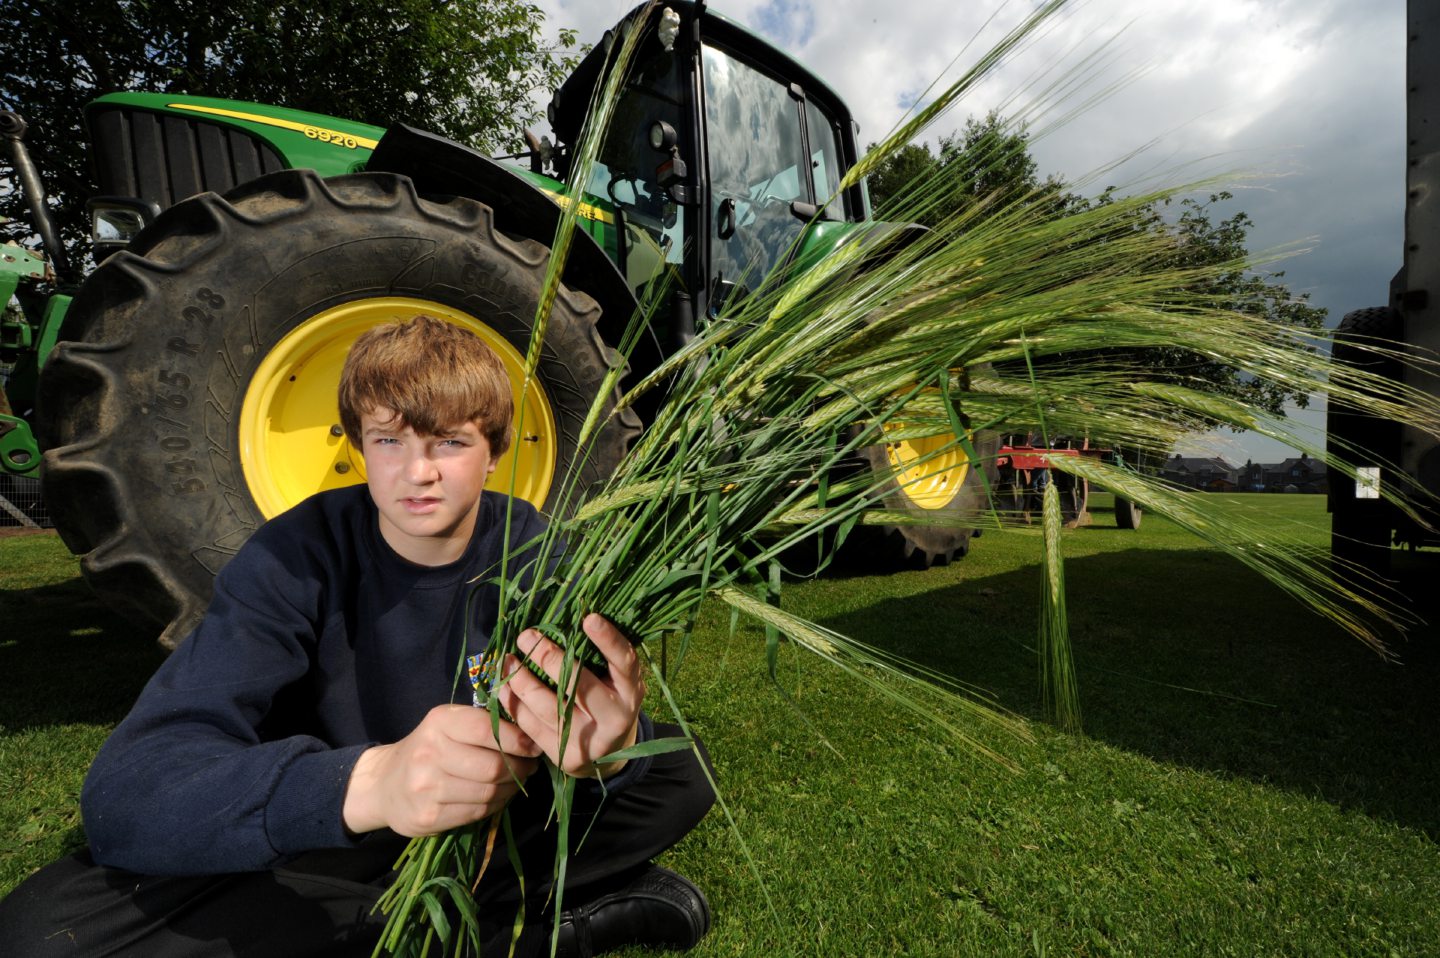 A pupil holding crops in front of a tractor